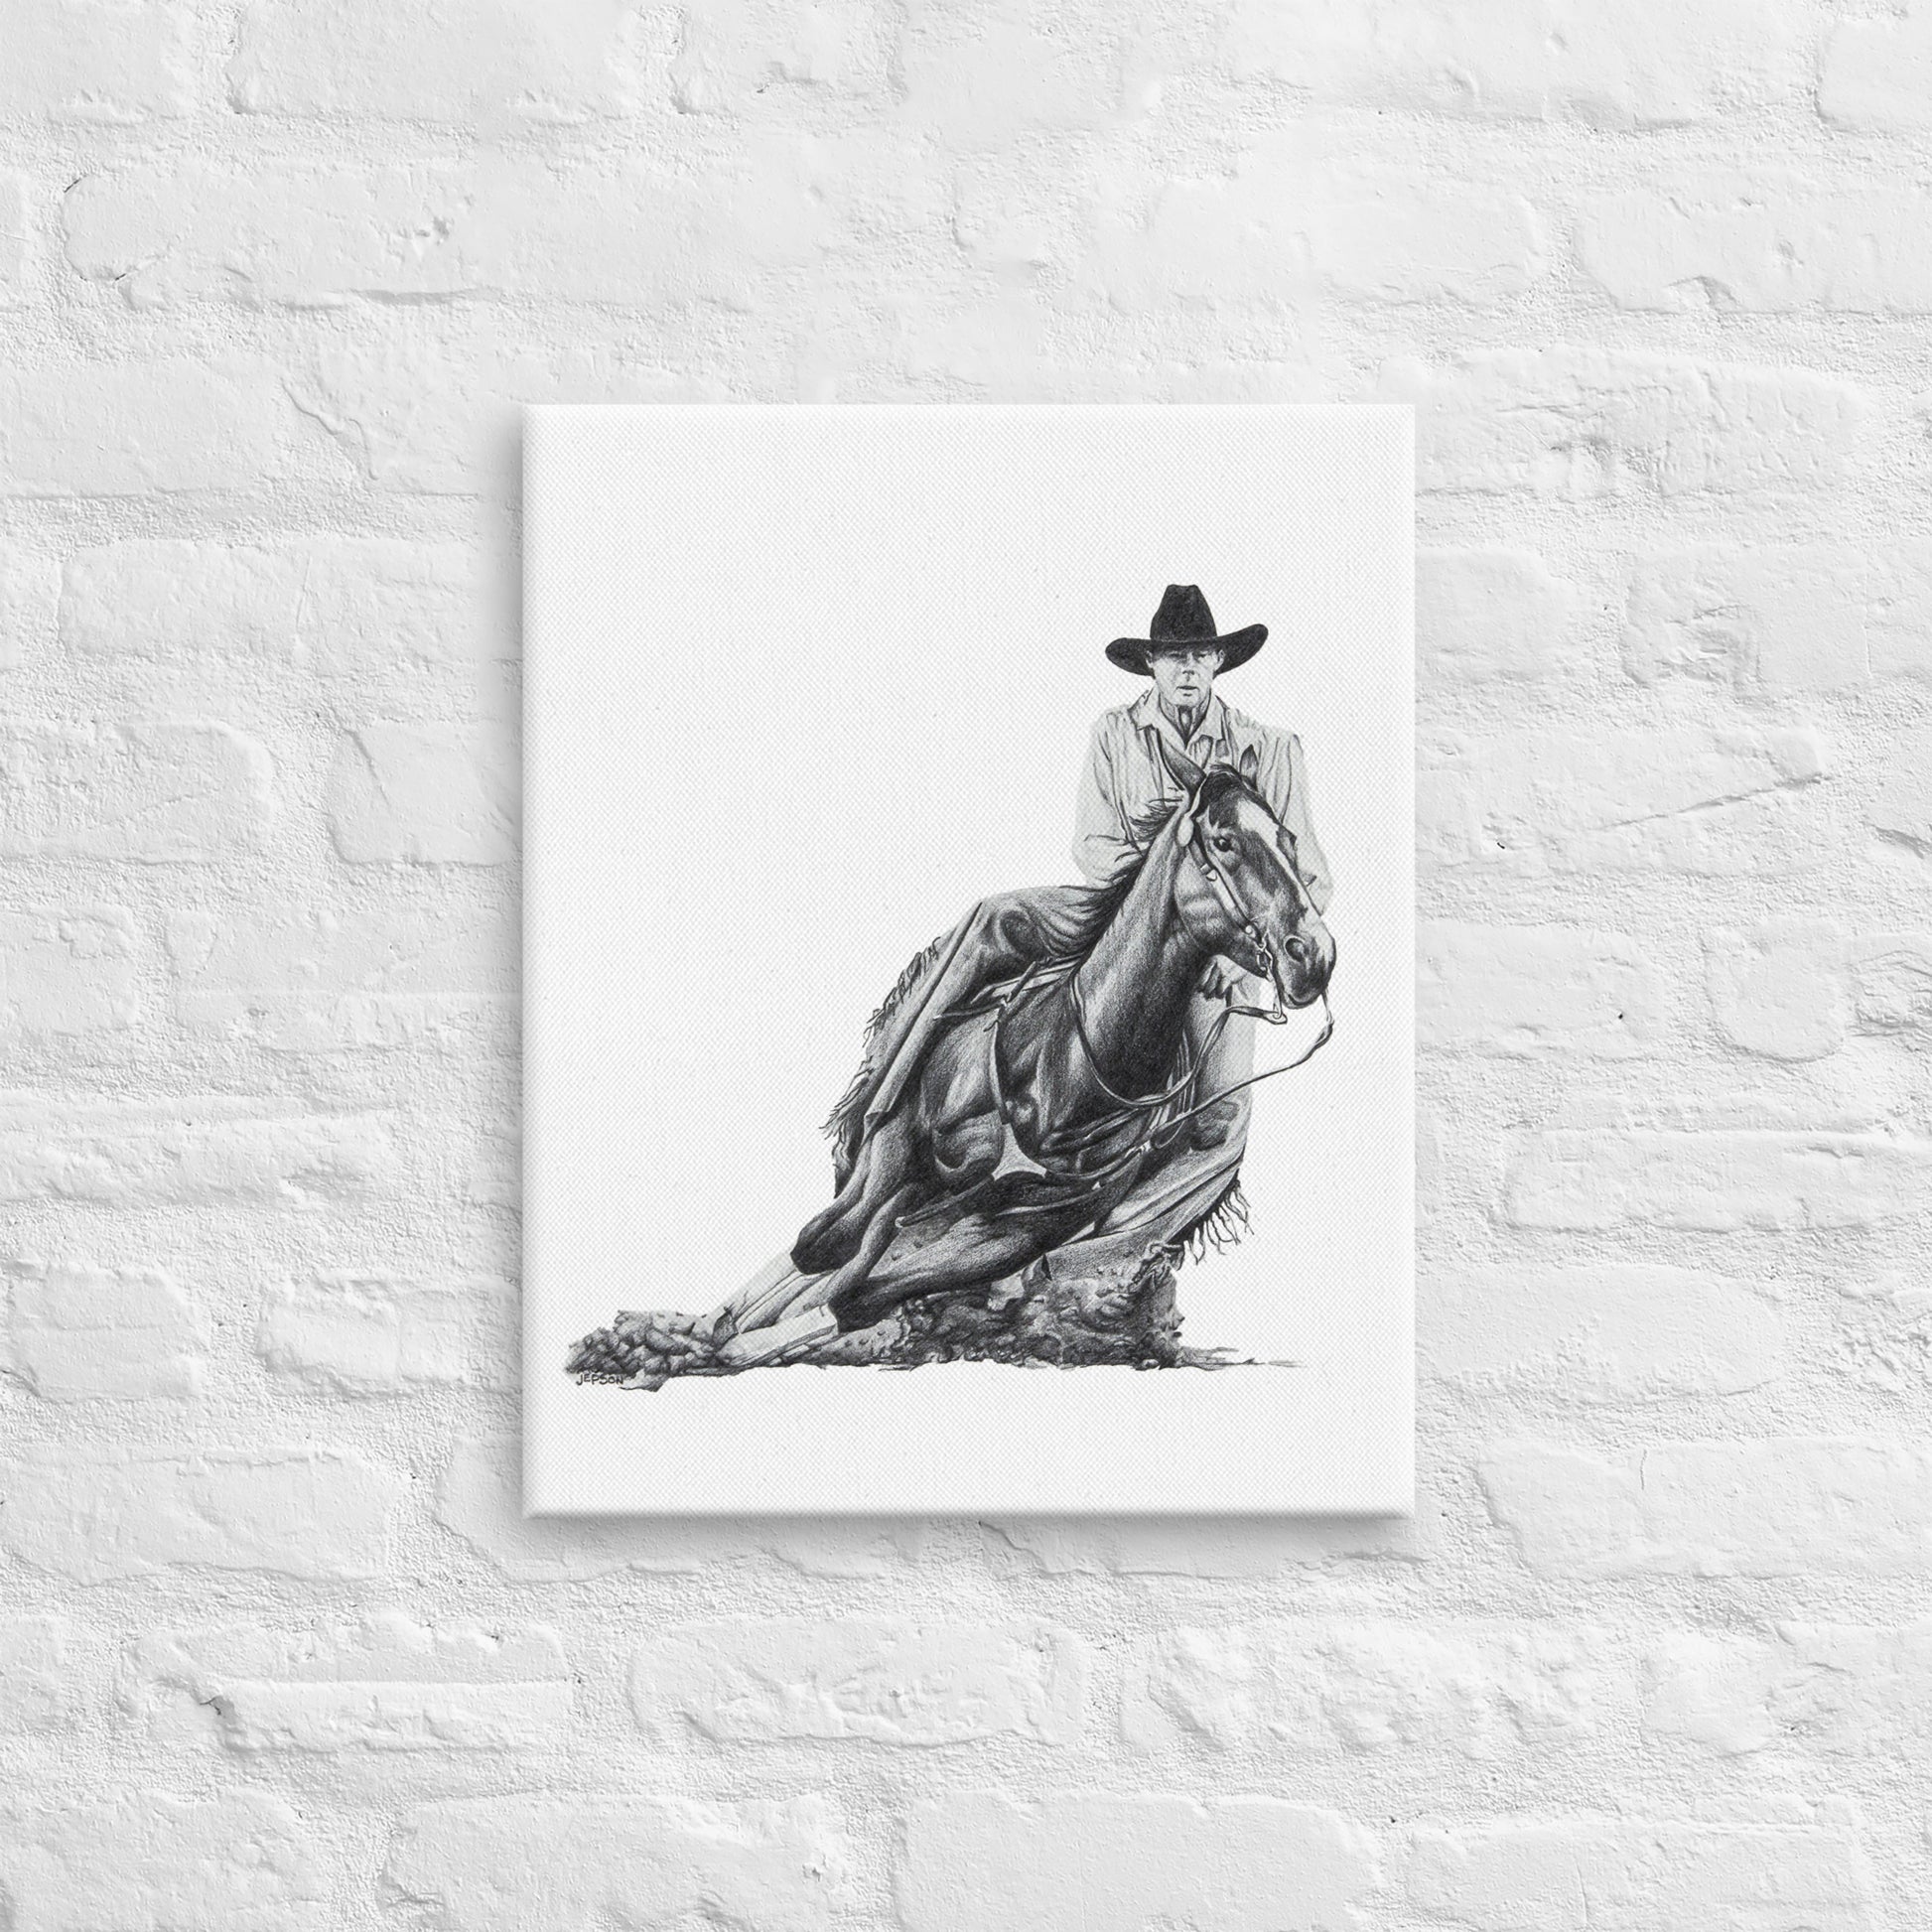 These "Cowboy Canvas Wall Hangings" are from a drawing of mine created with graphite pencil. It is titled "A Cut Above" as it is a cowboy on a cutting horse. It has been digitally optimized and transferred to a poly-cotton blend canvas.